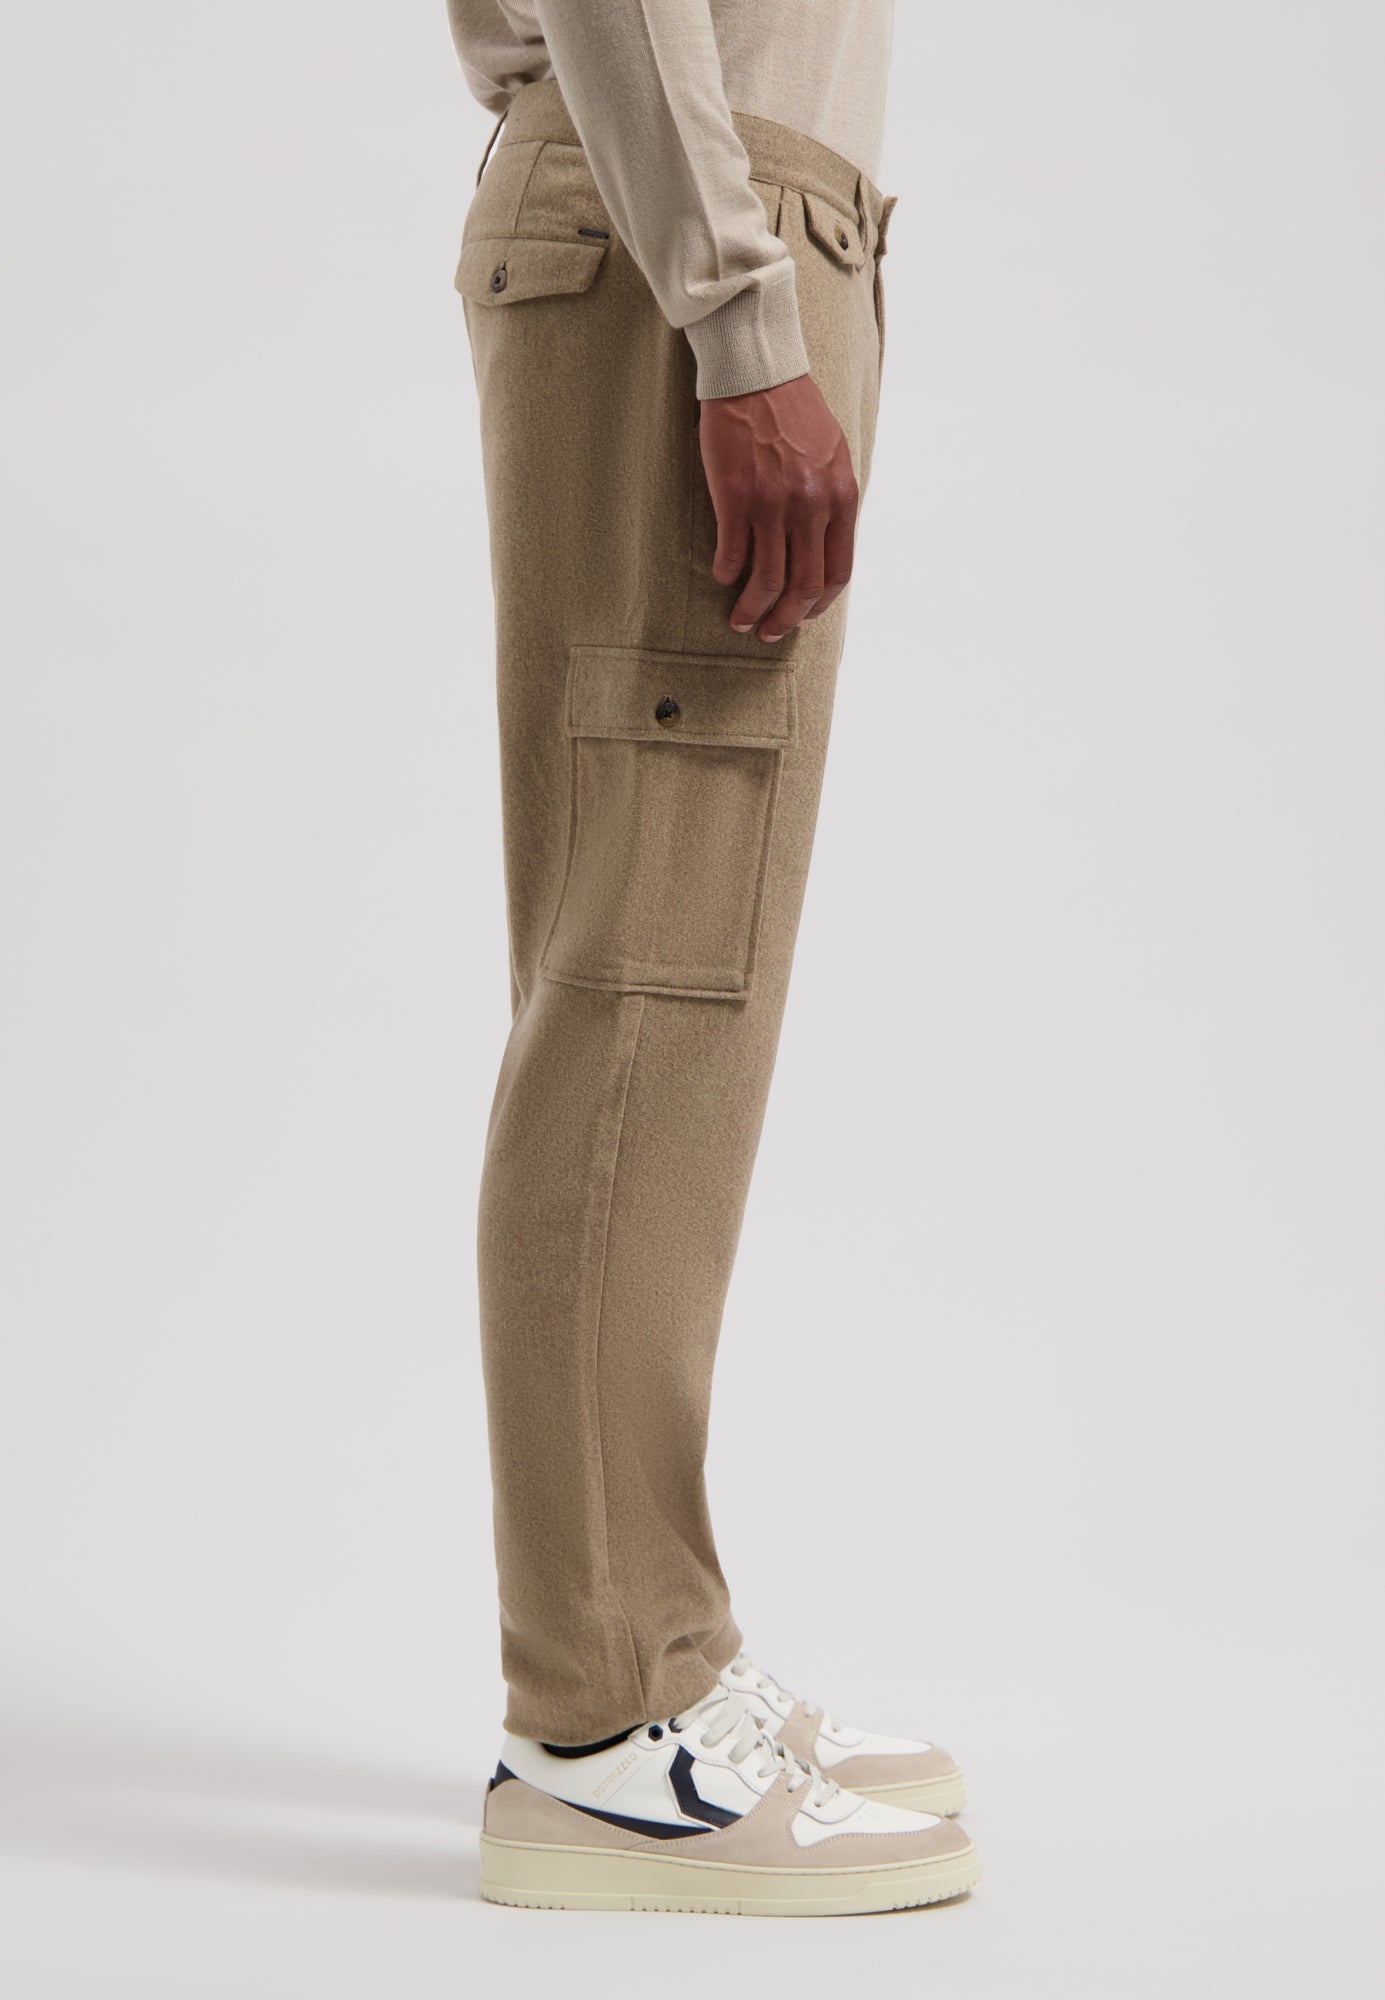 Dstrezzed - Marlon Tapered Wool Combat Pant  - Coffee